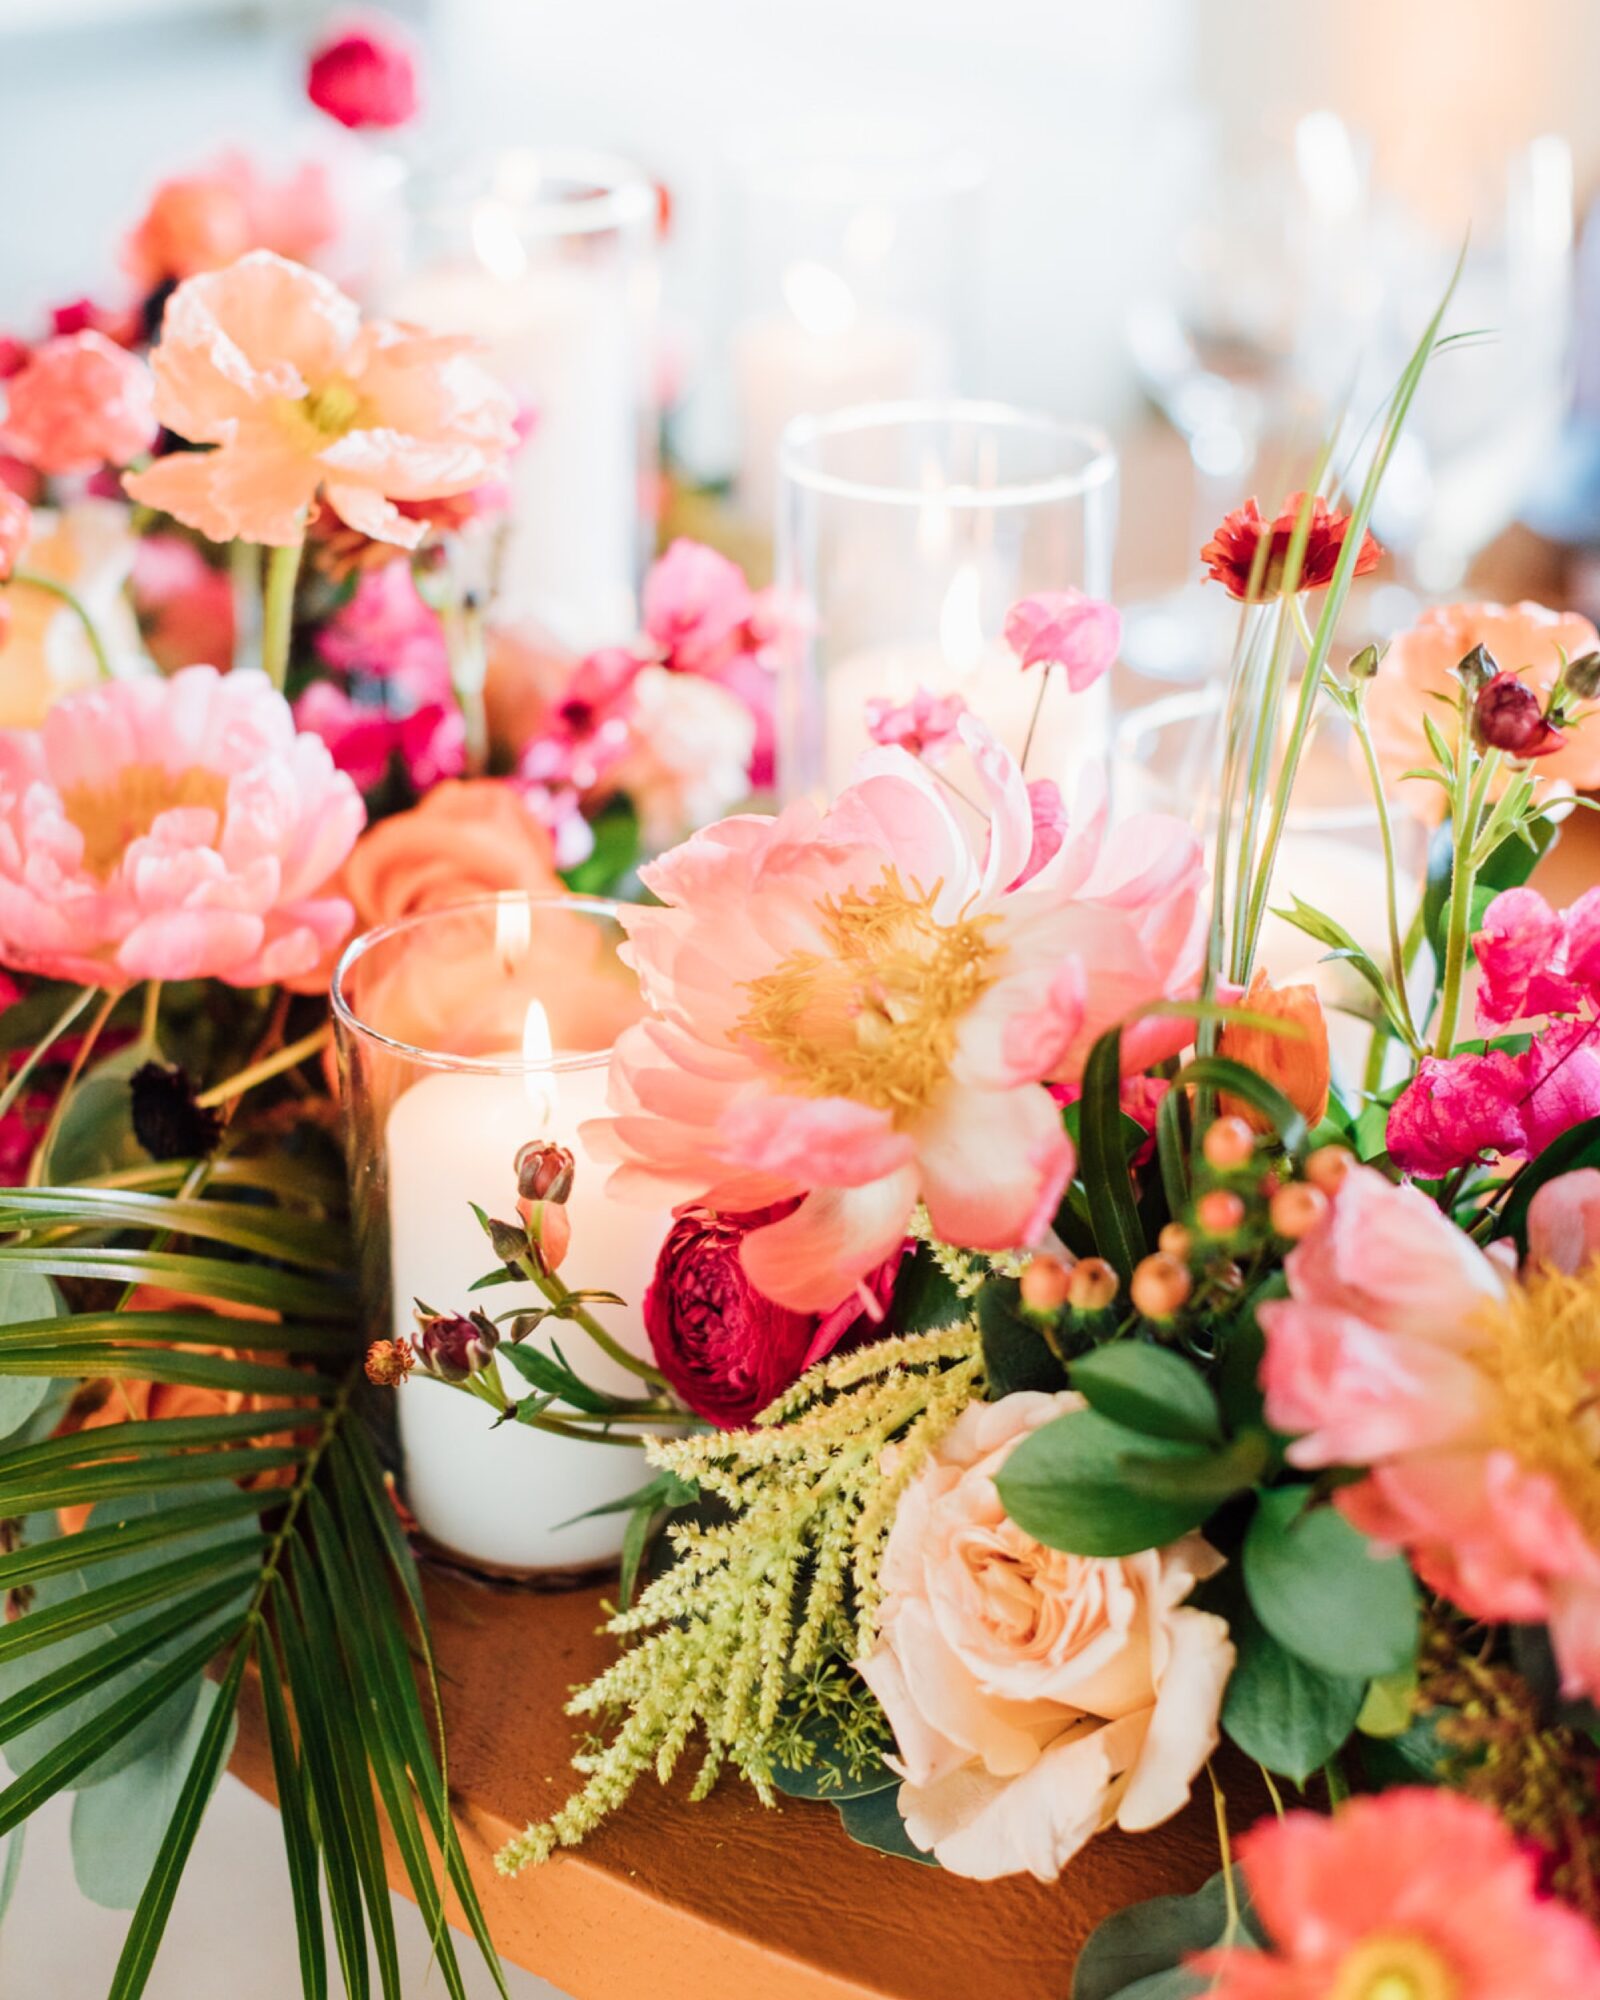 reception florals at sweetheart table by Fluid Bloom photographed by Jessica Sofranko at La Lomita Ranch